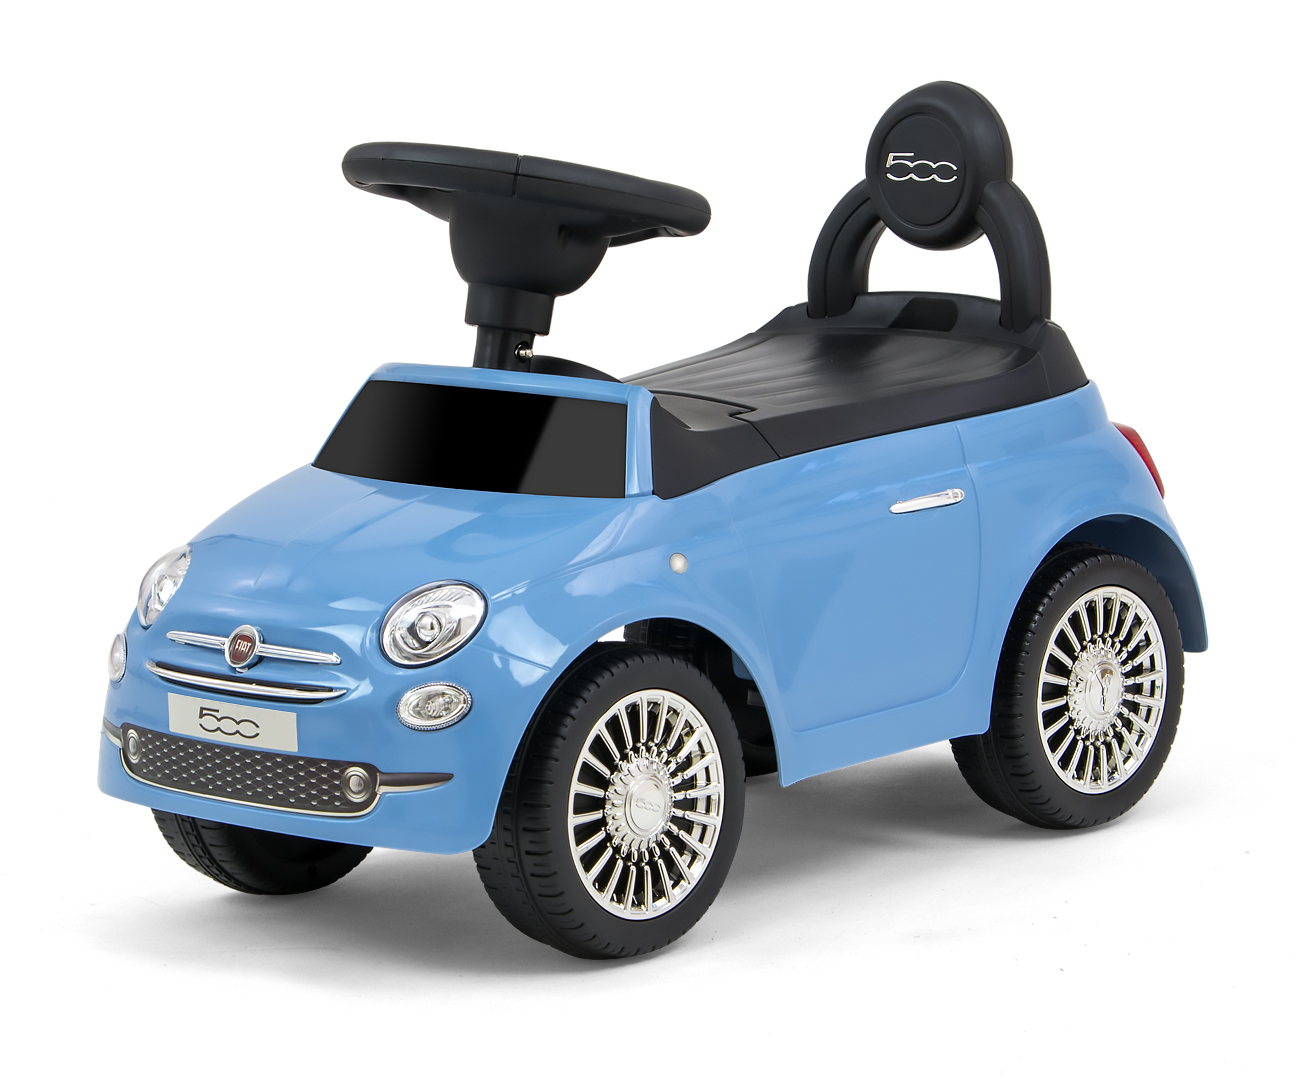 Milly Mally Ride On Fiat 500 Blue